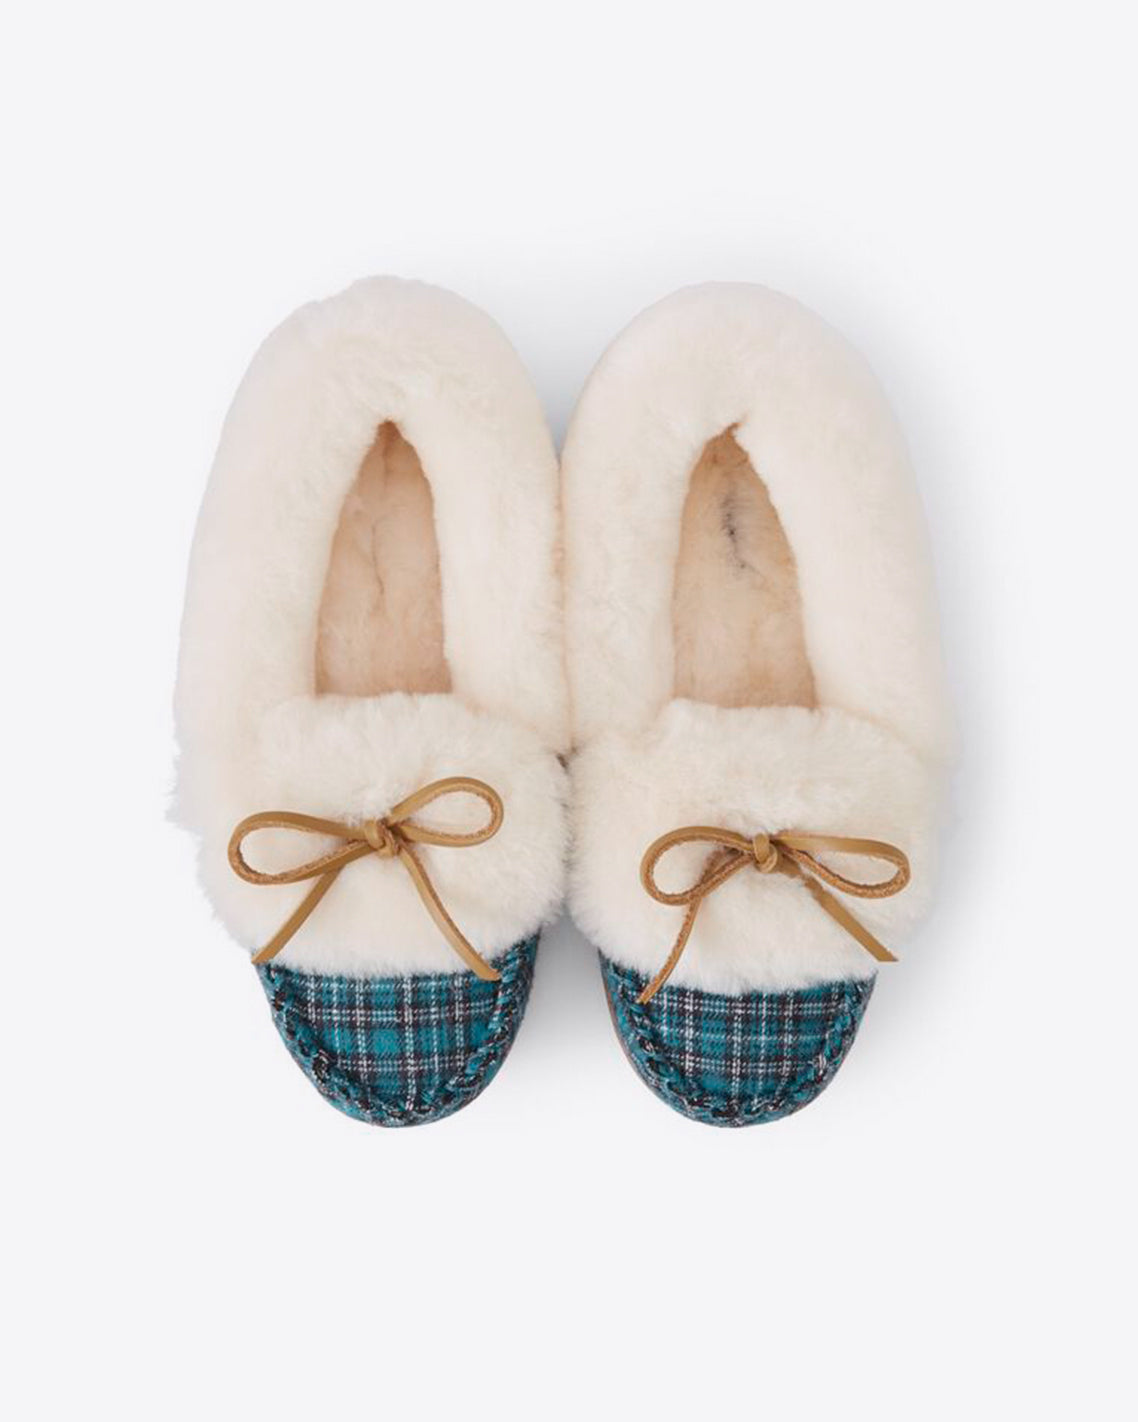 DJ x Lands' End Women's Plaid Shearling Moccasin Slippers